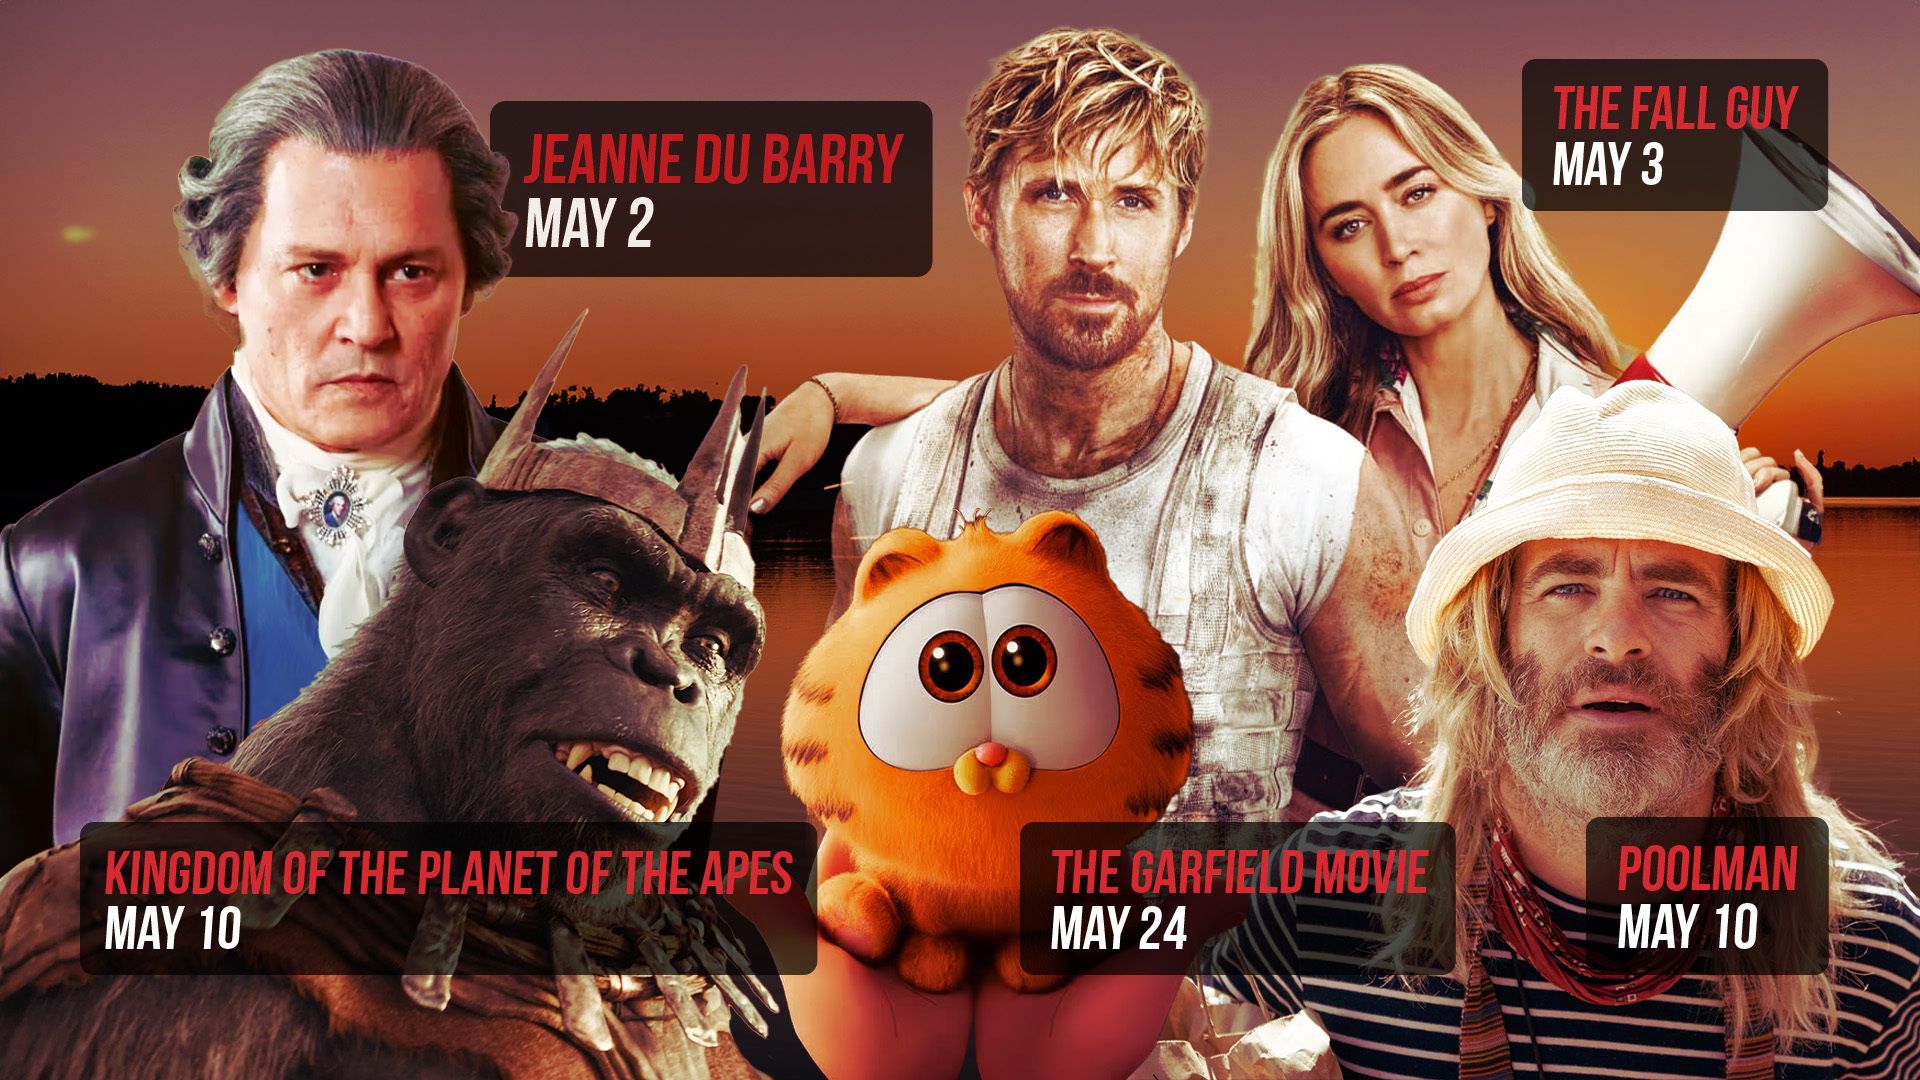 Summer Movie Releases with Garfield, Poolman, Kingdom of the Planet of the Apes, The Fall Guy, and Jeanne Du Barry